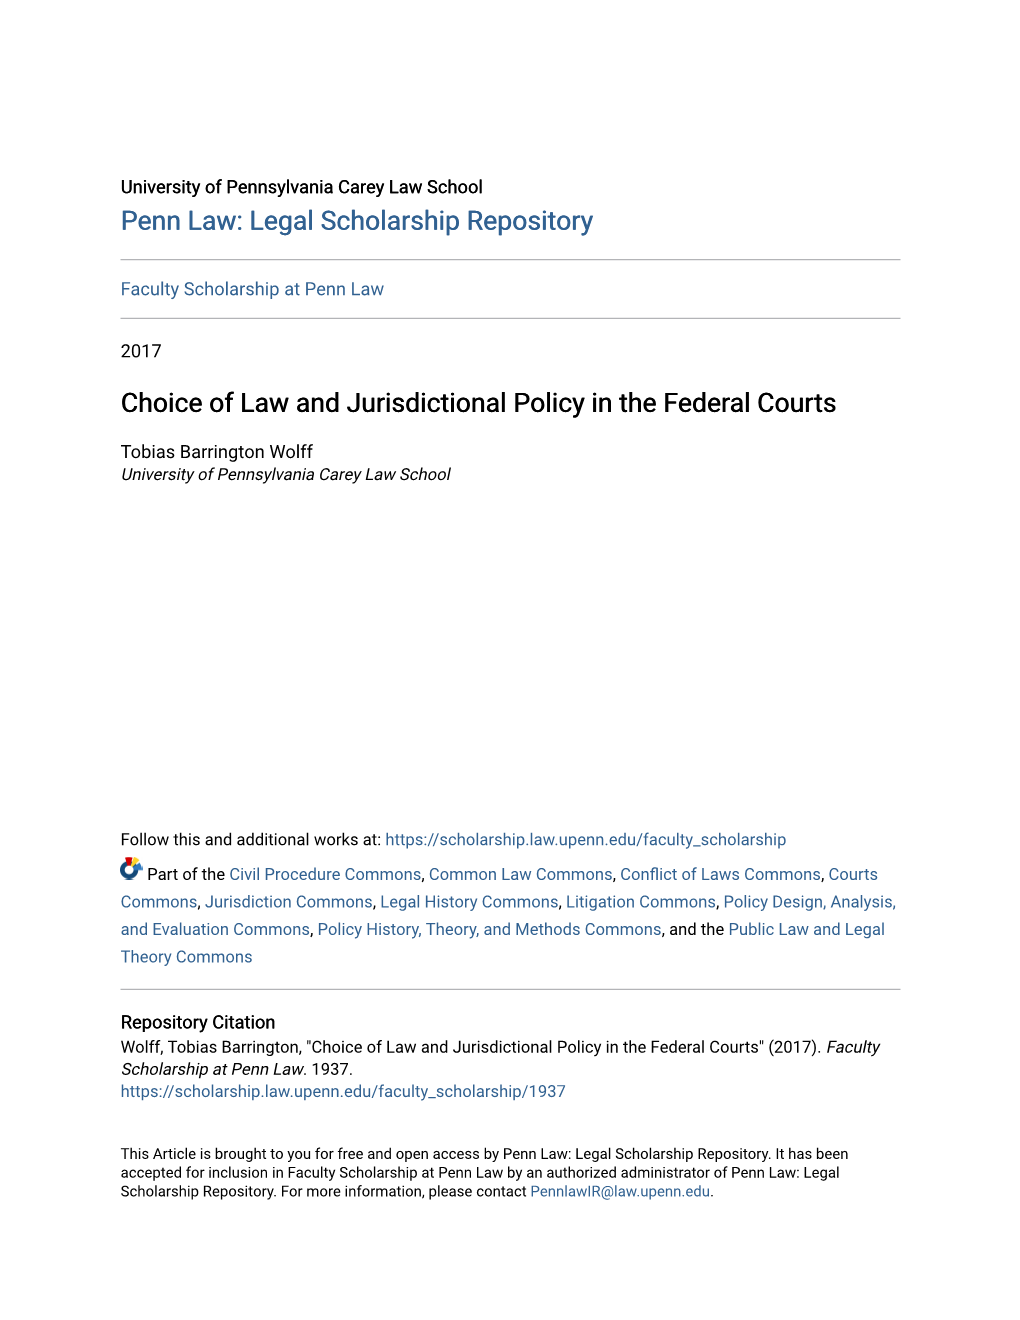 Choice of Law and Jurisdictional Policy in the Federal Courts